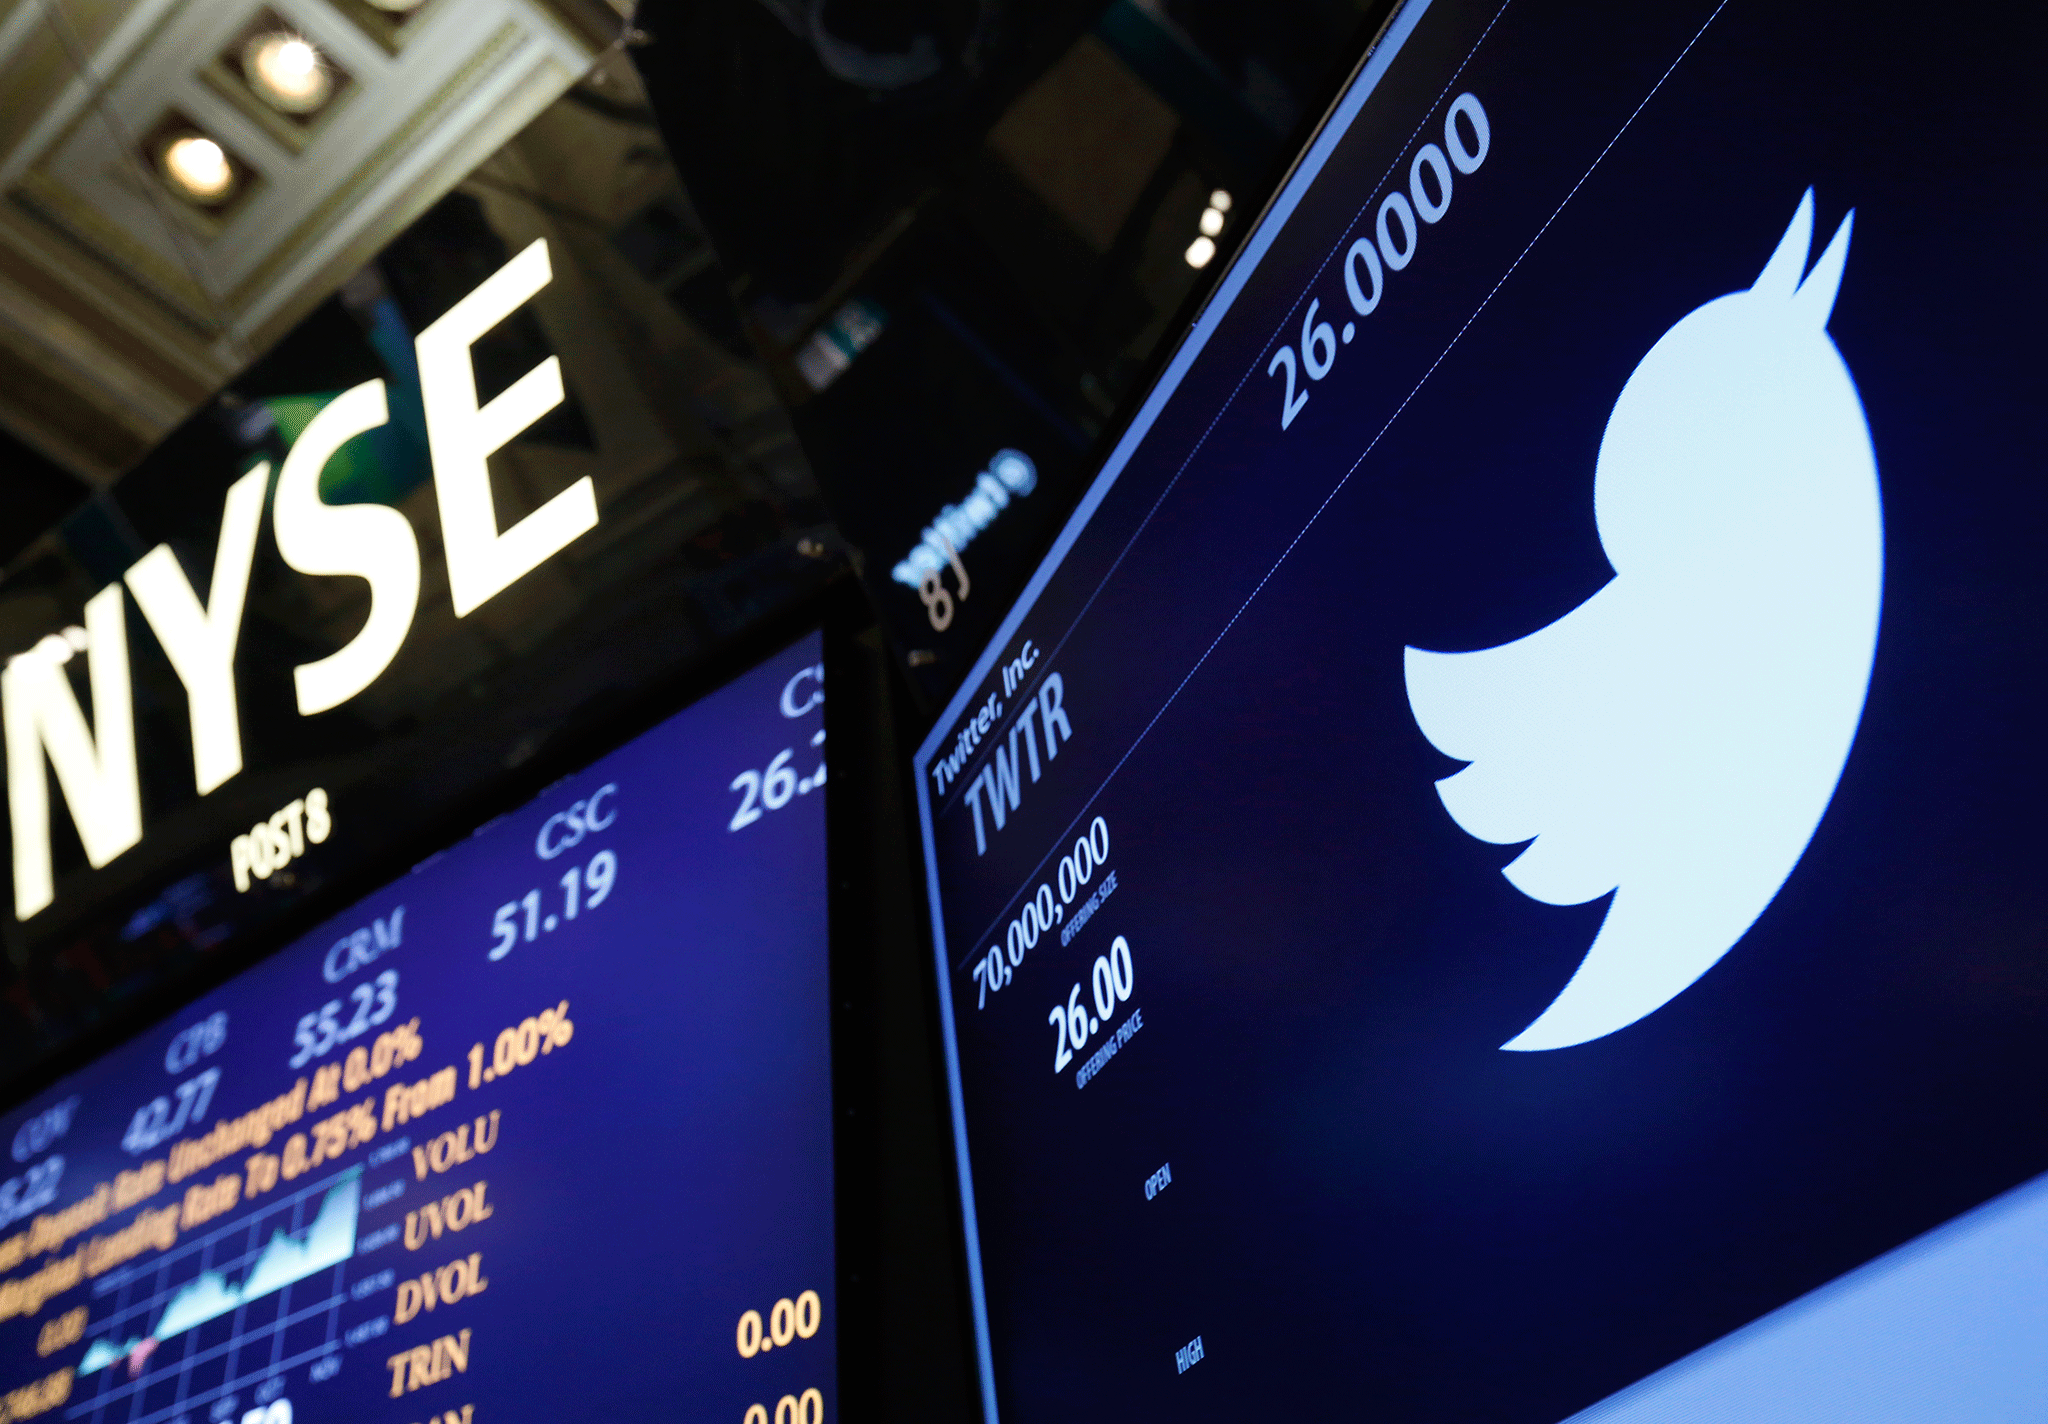 Twitter's share price tumbled after Google was rumoured to have ended any interest in a potential acquisition